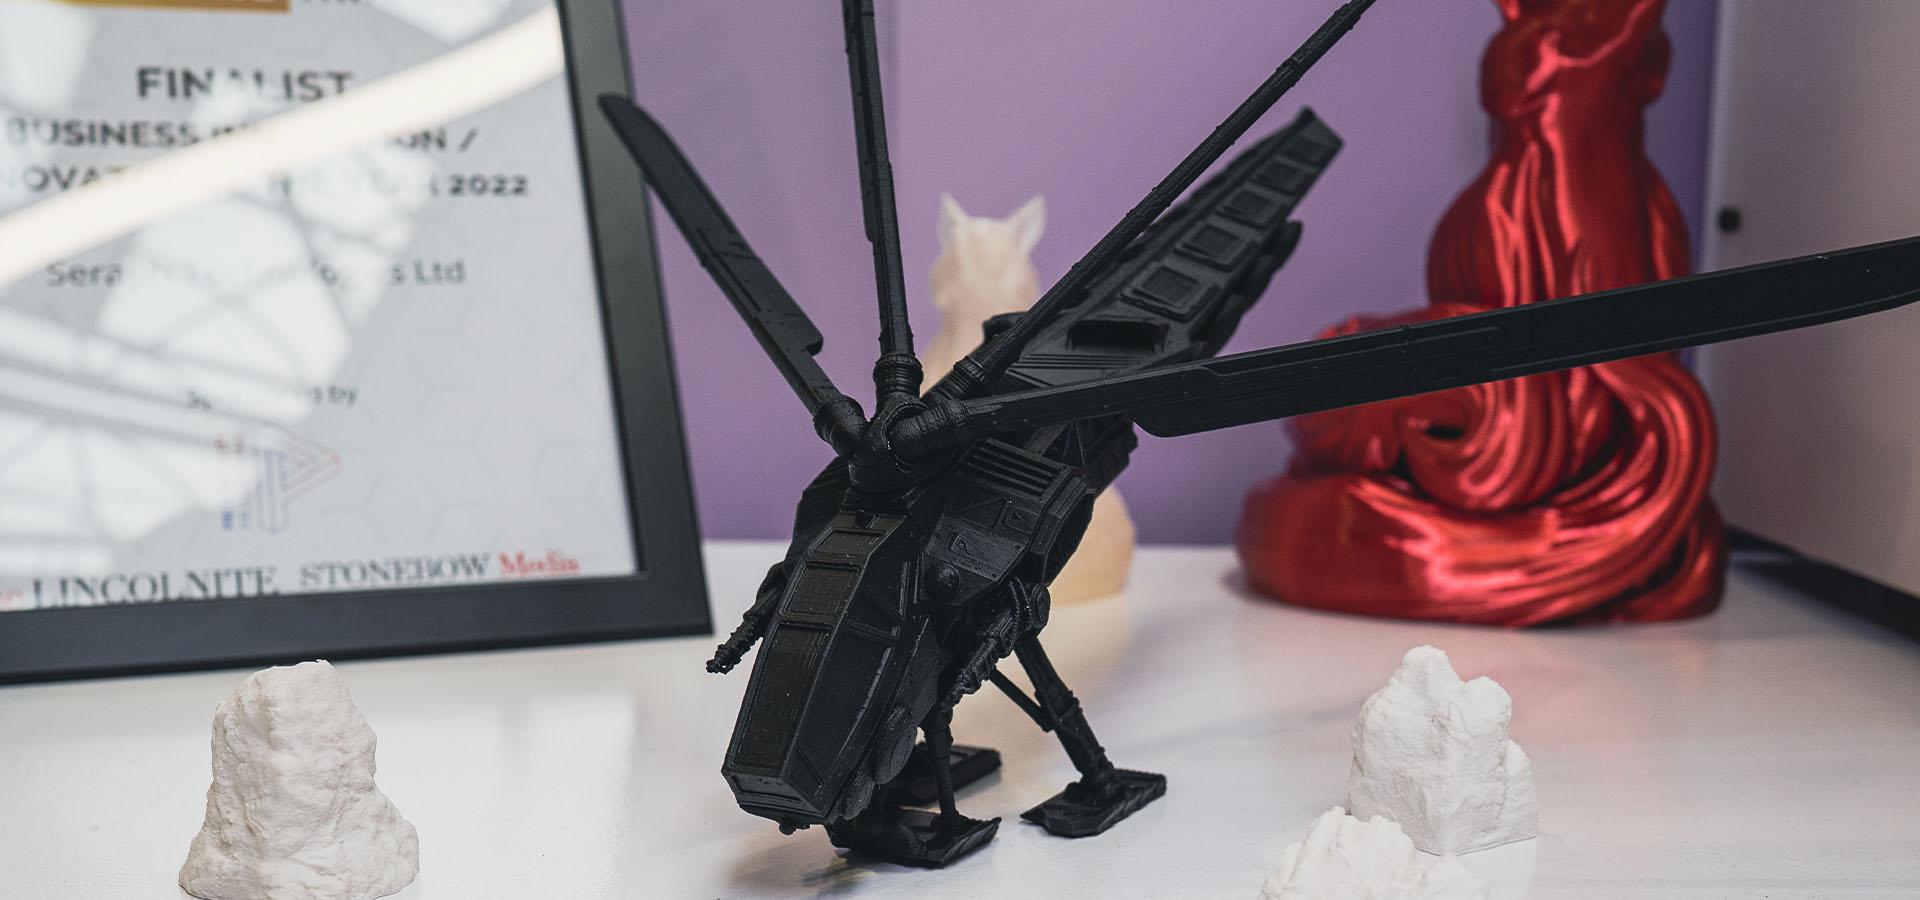 a 3d printed helicopter